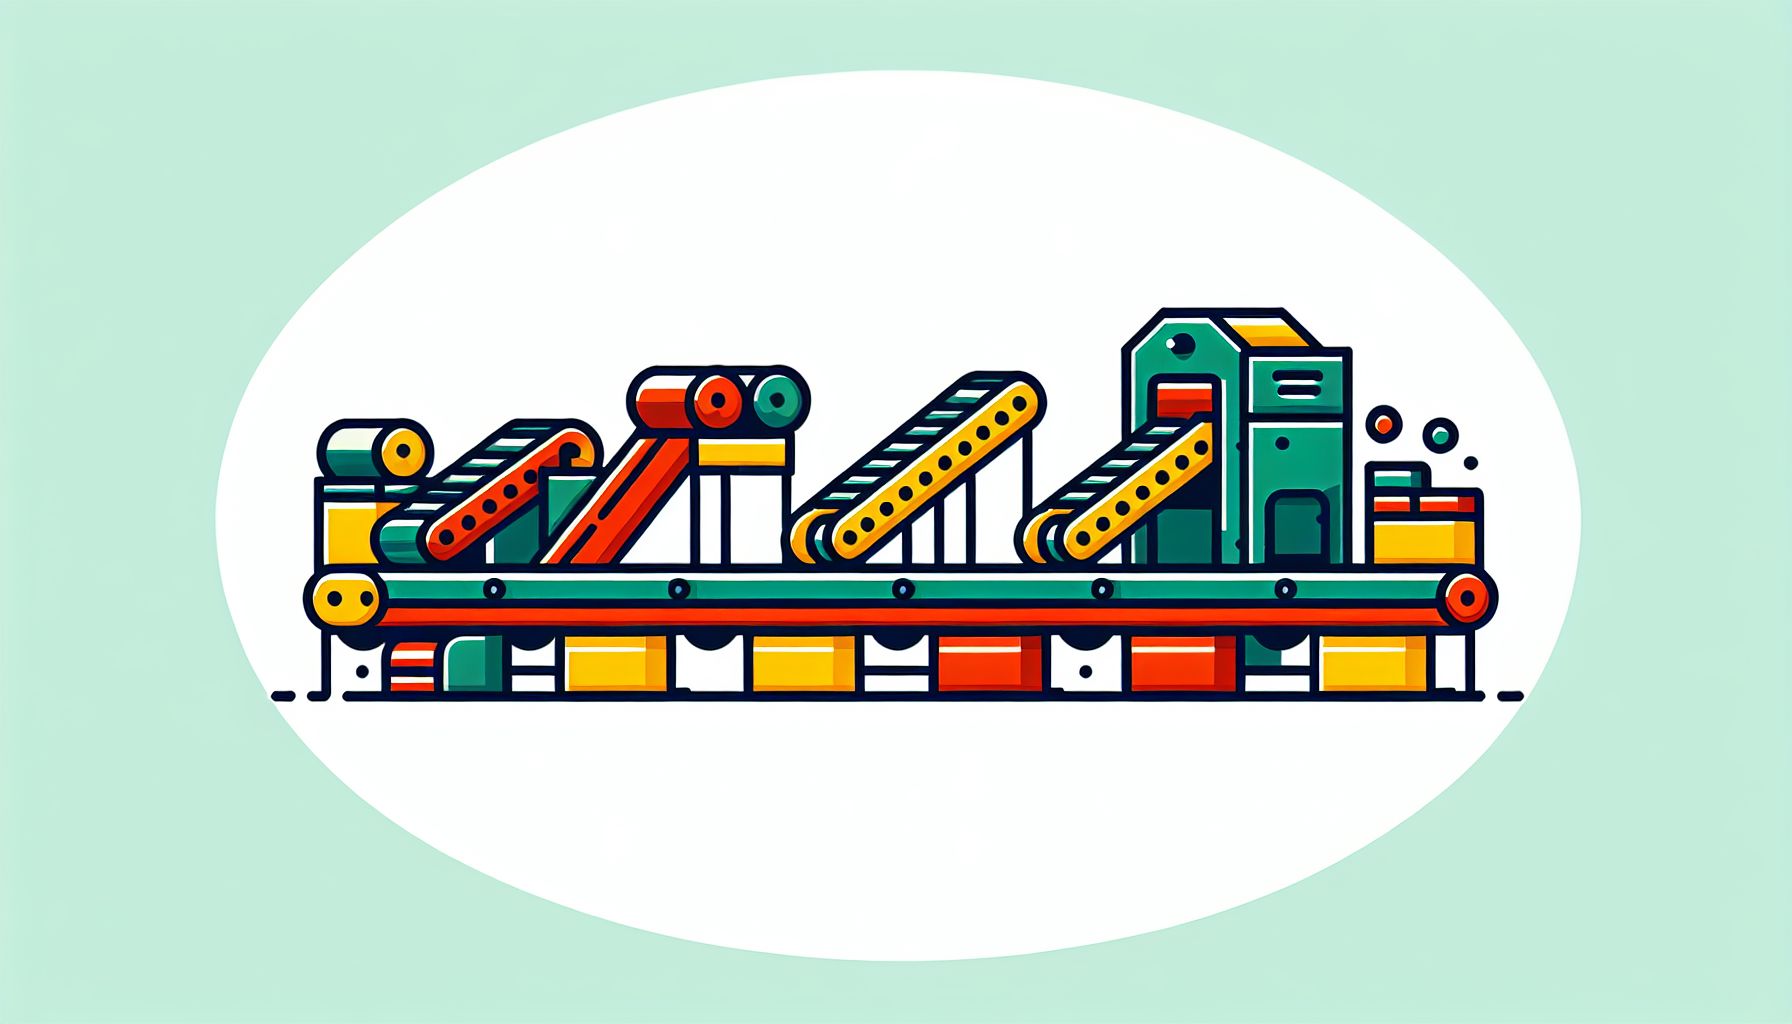 Conveyor in flat illustration style and white background, red #f47574, green #88c7a8, yellow #fcc44b, and blue #645bc8 colors.